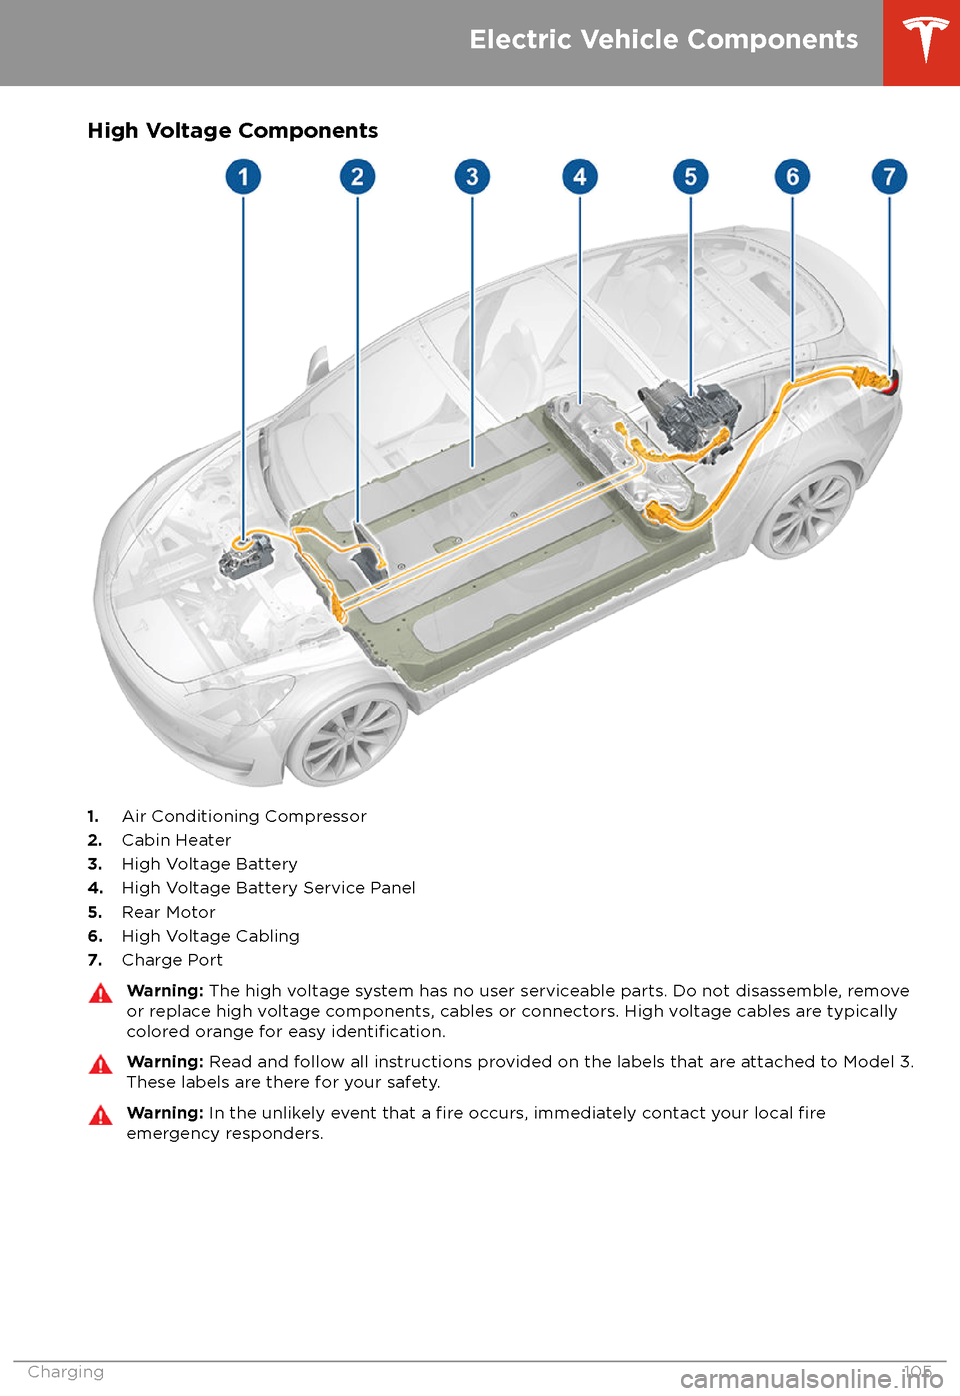 TESLA MODEL 3 2018 Owners Guide High Voltage Components
1.Air Conditioning Compressor
2. Cabin Heater
3. High Voltage Battery
4. High Voltage Battery Service Panel
5. Rear Motor
6. High Voltage Cabling
7. Charge Port
Warning: 
The h